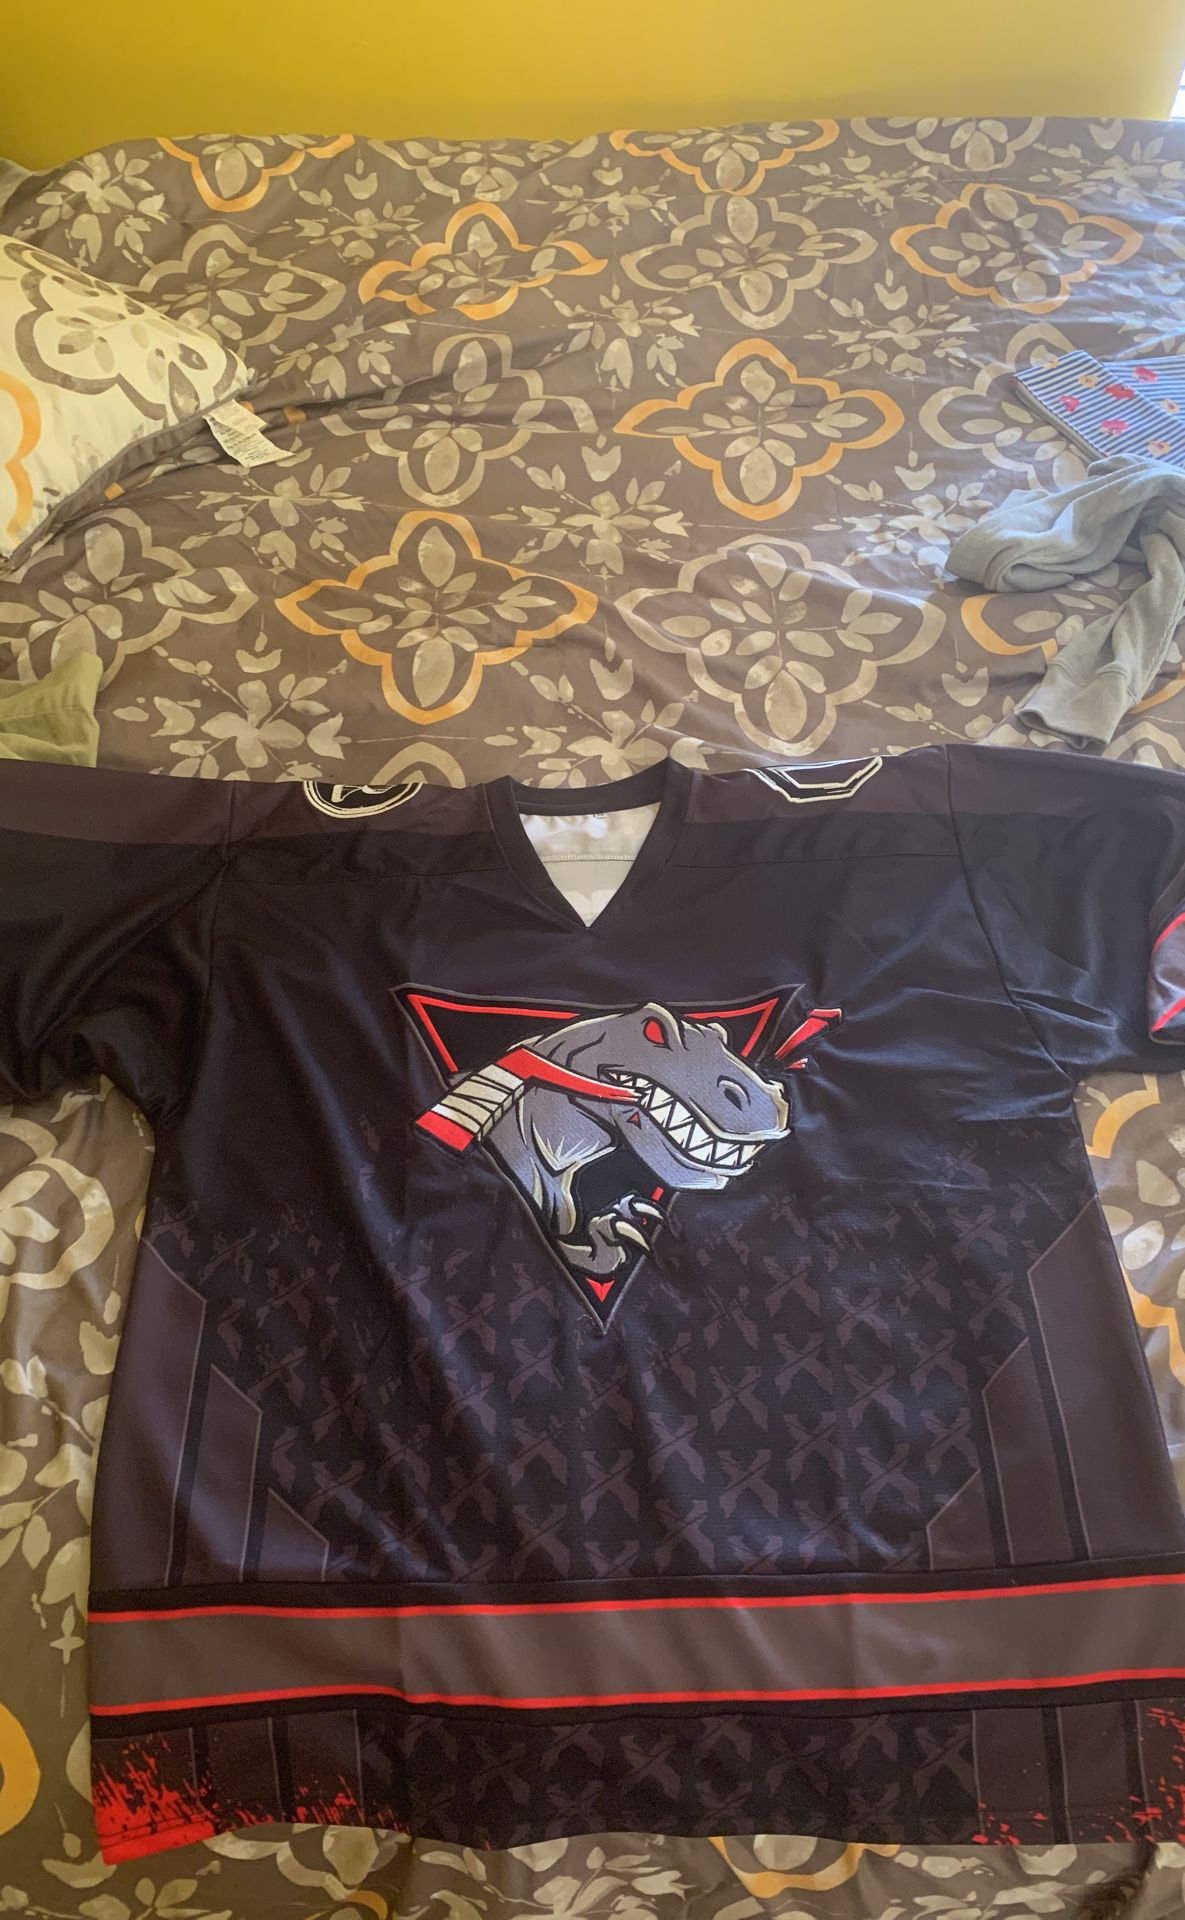 excision jersey